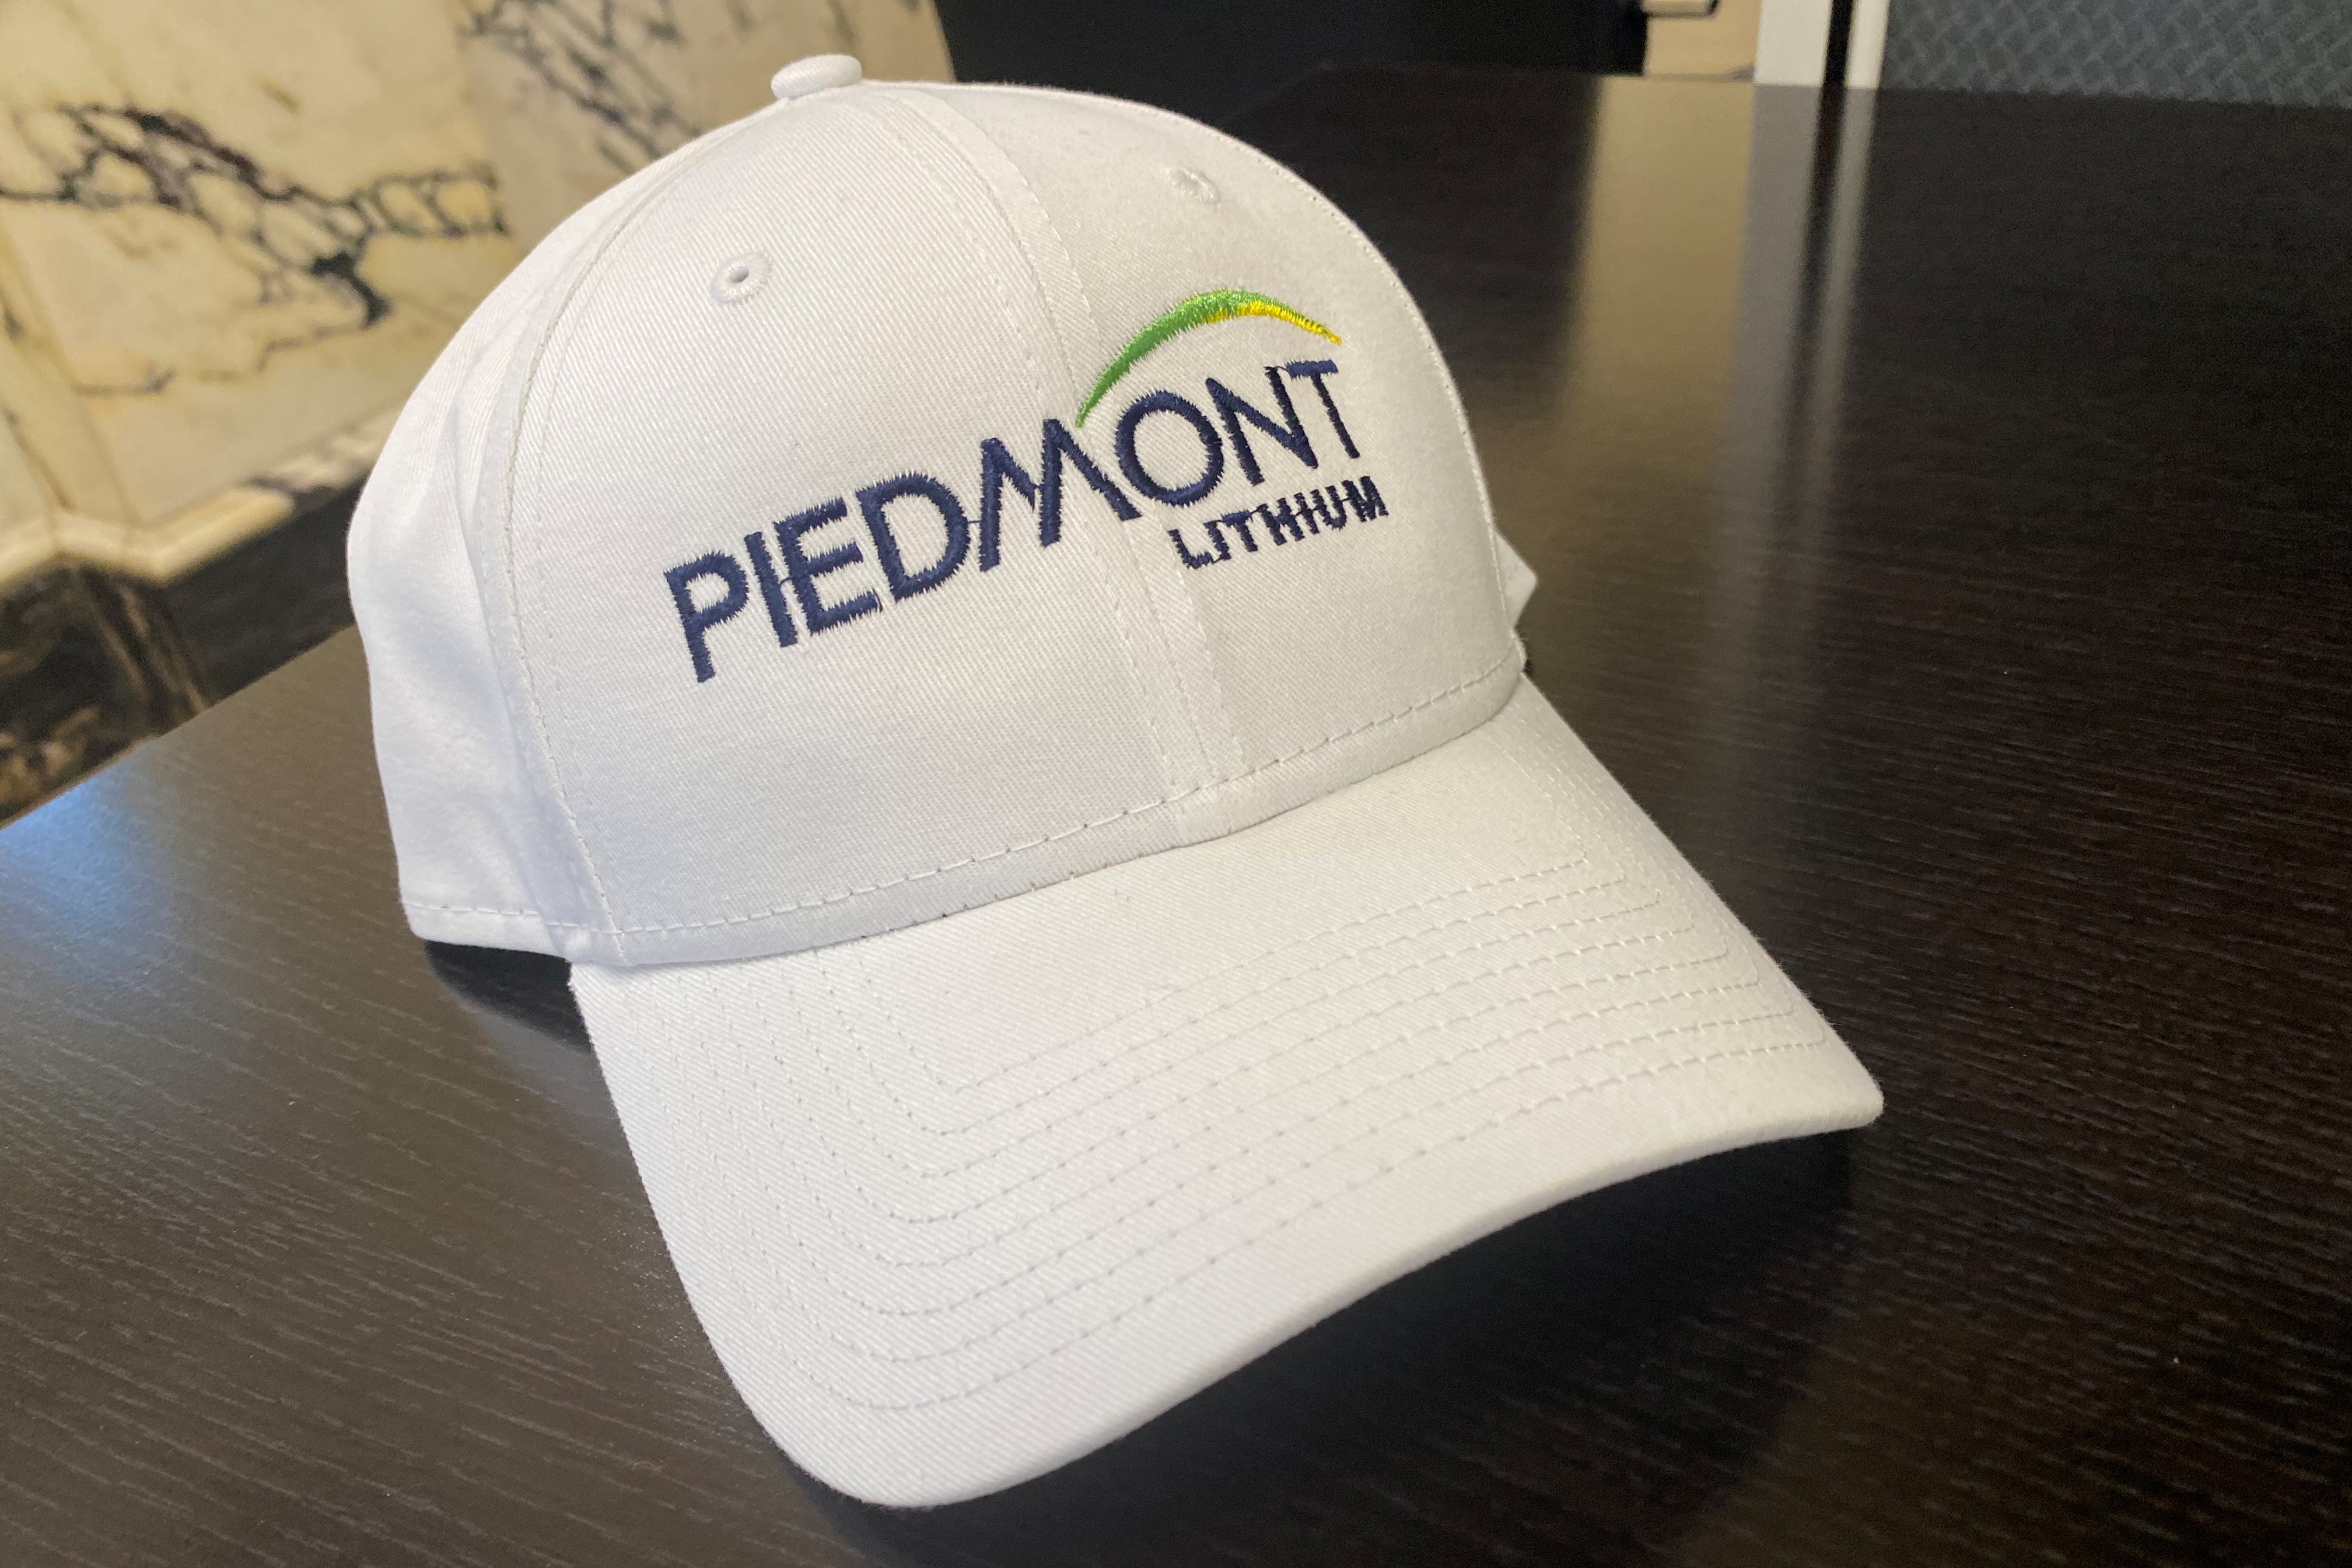 A hat is displayed at Piedmont Lithium's headquarters in Belmont